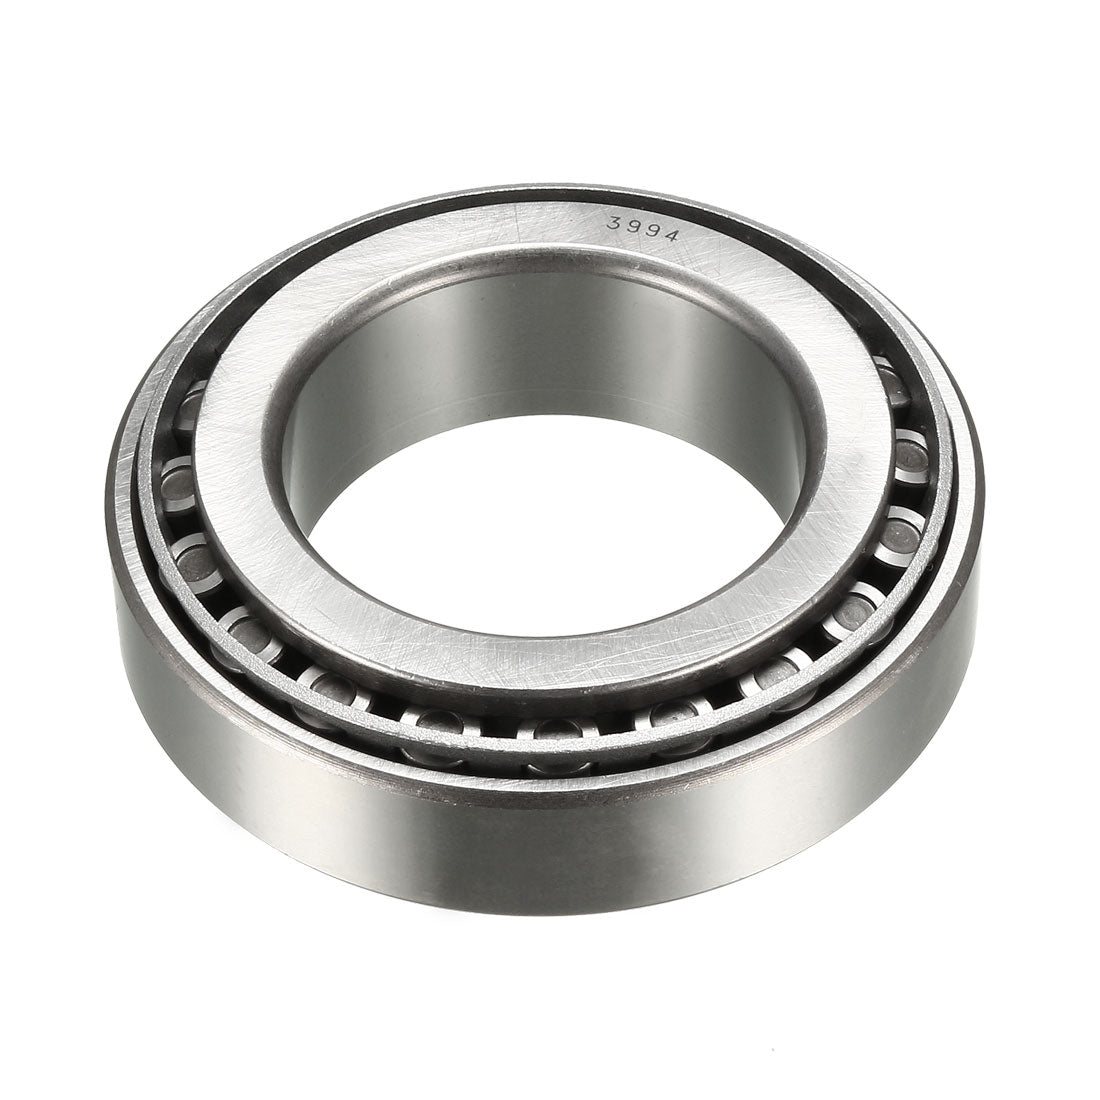 uxcell Uxcell 3994/3920 Tapered Roller Bearing Cone and Cup Set 2.625" Bore 4.4375" O.D.